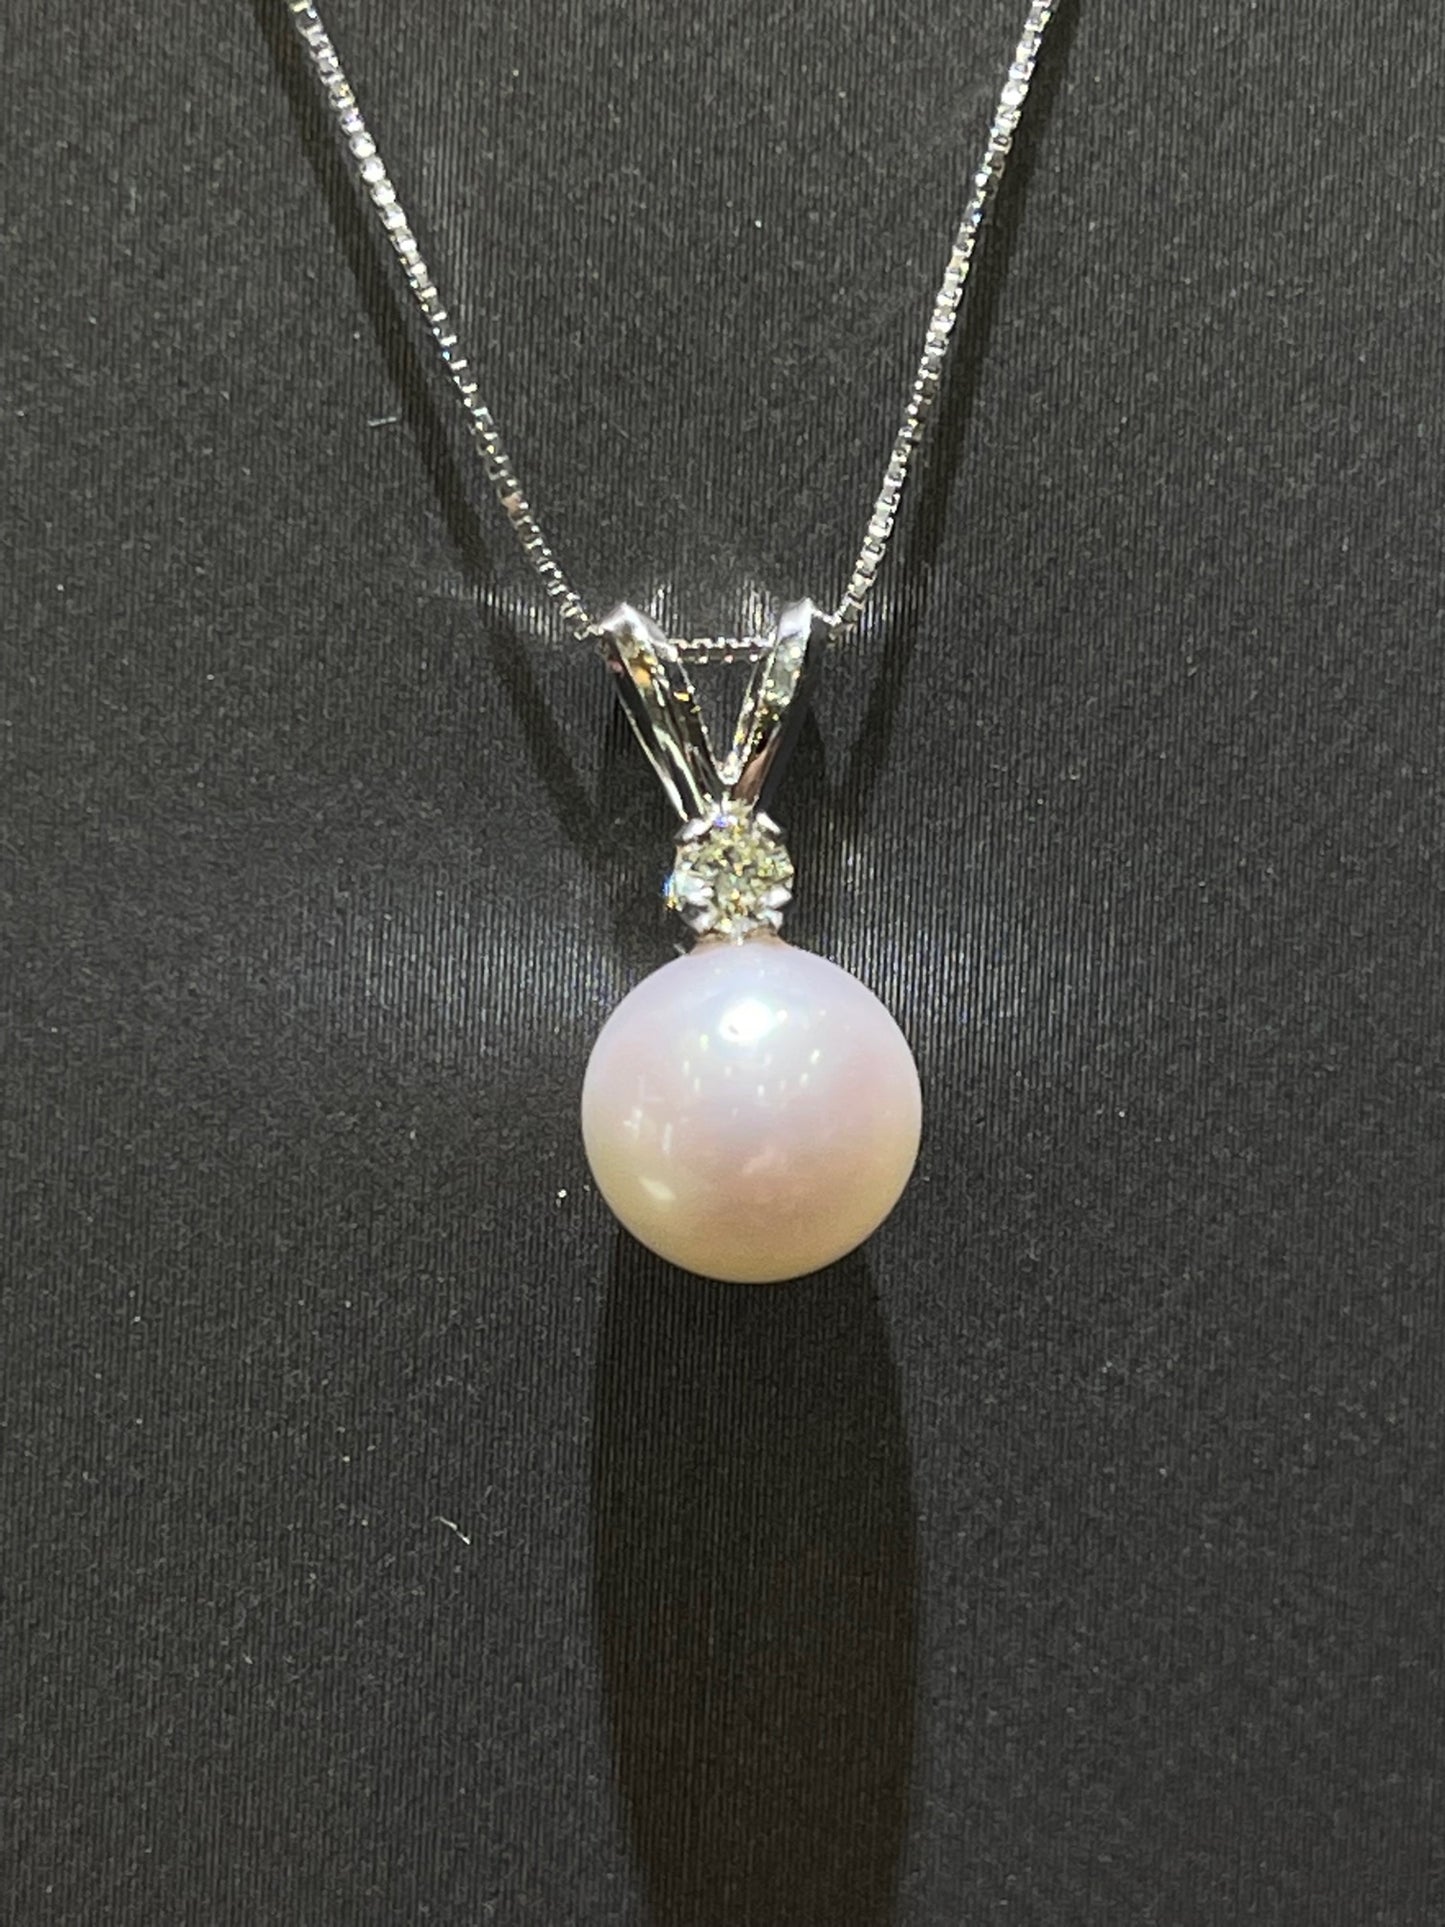 14KW AKOYA CULTURED PEARL NECKLACE PENDANT 7.5-8.0MM W/1 RD DIA 0.05CT NECKLACE